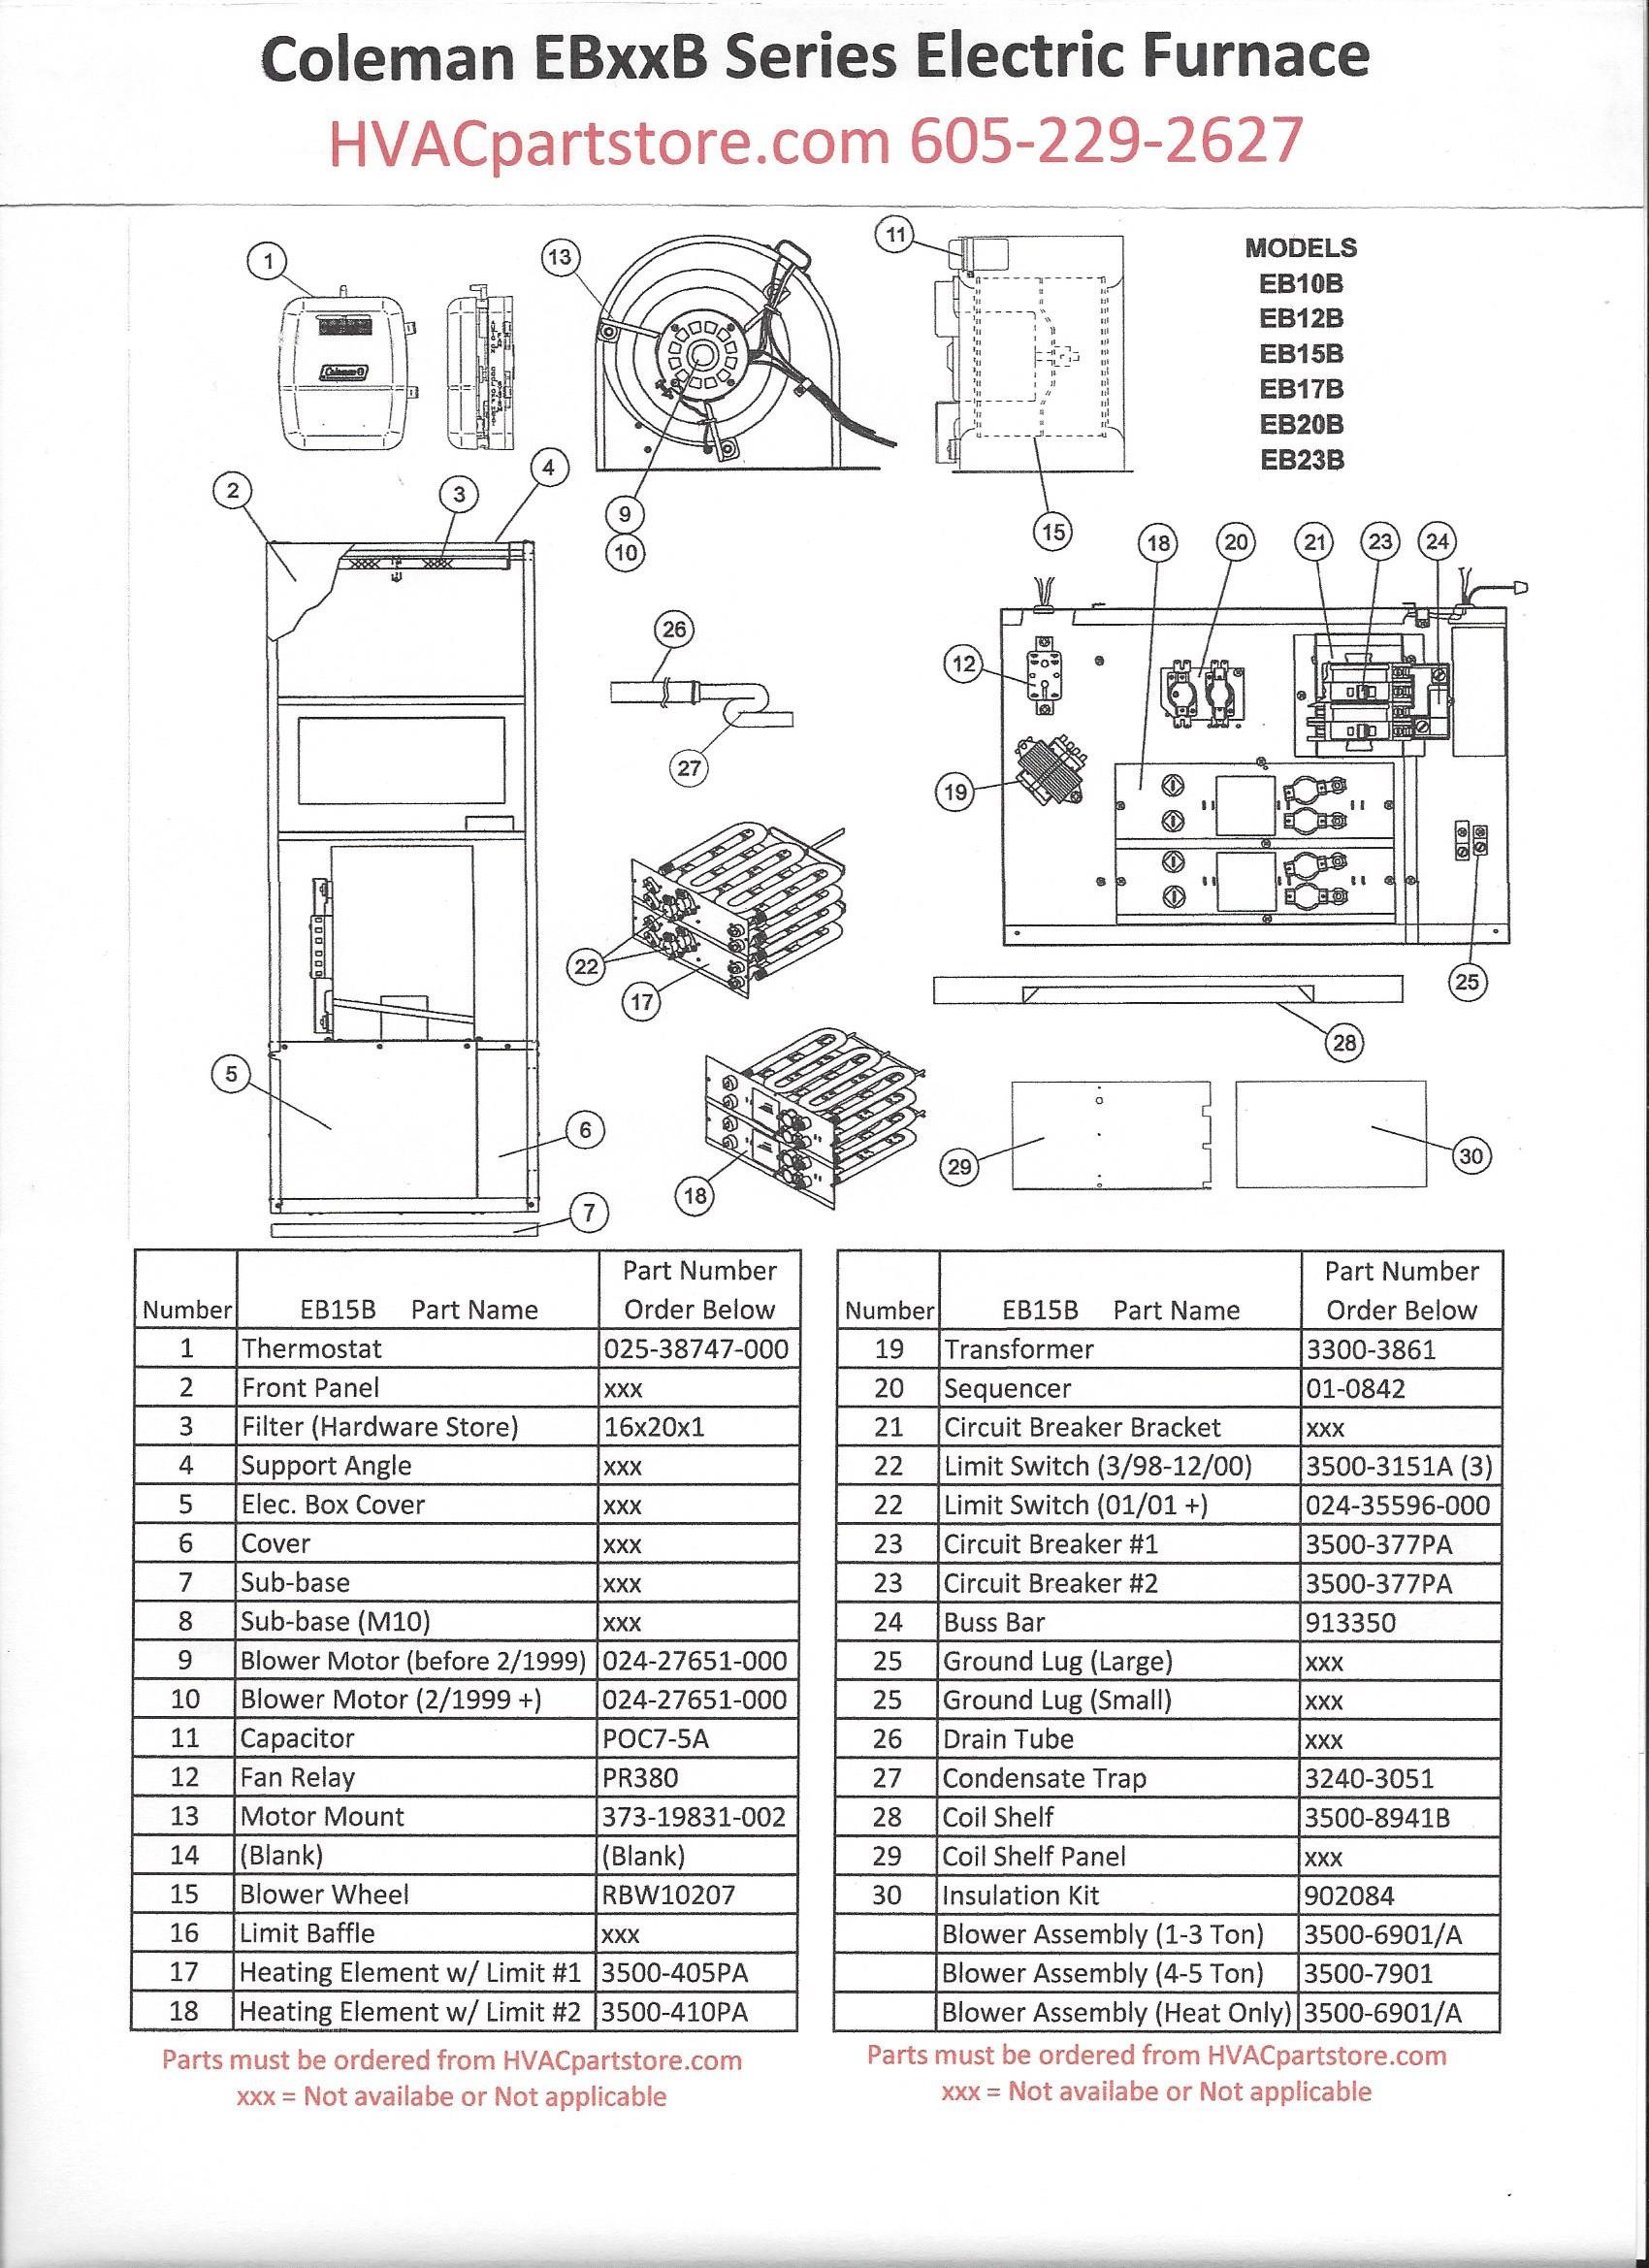 Home Electrical Wiring Diagrams Luxury Beautiful Intertherm Electric Furnace Wiring Diagram 20 For Boss Home Electrical Wiring Diagrams Intertherm